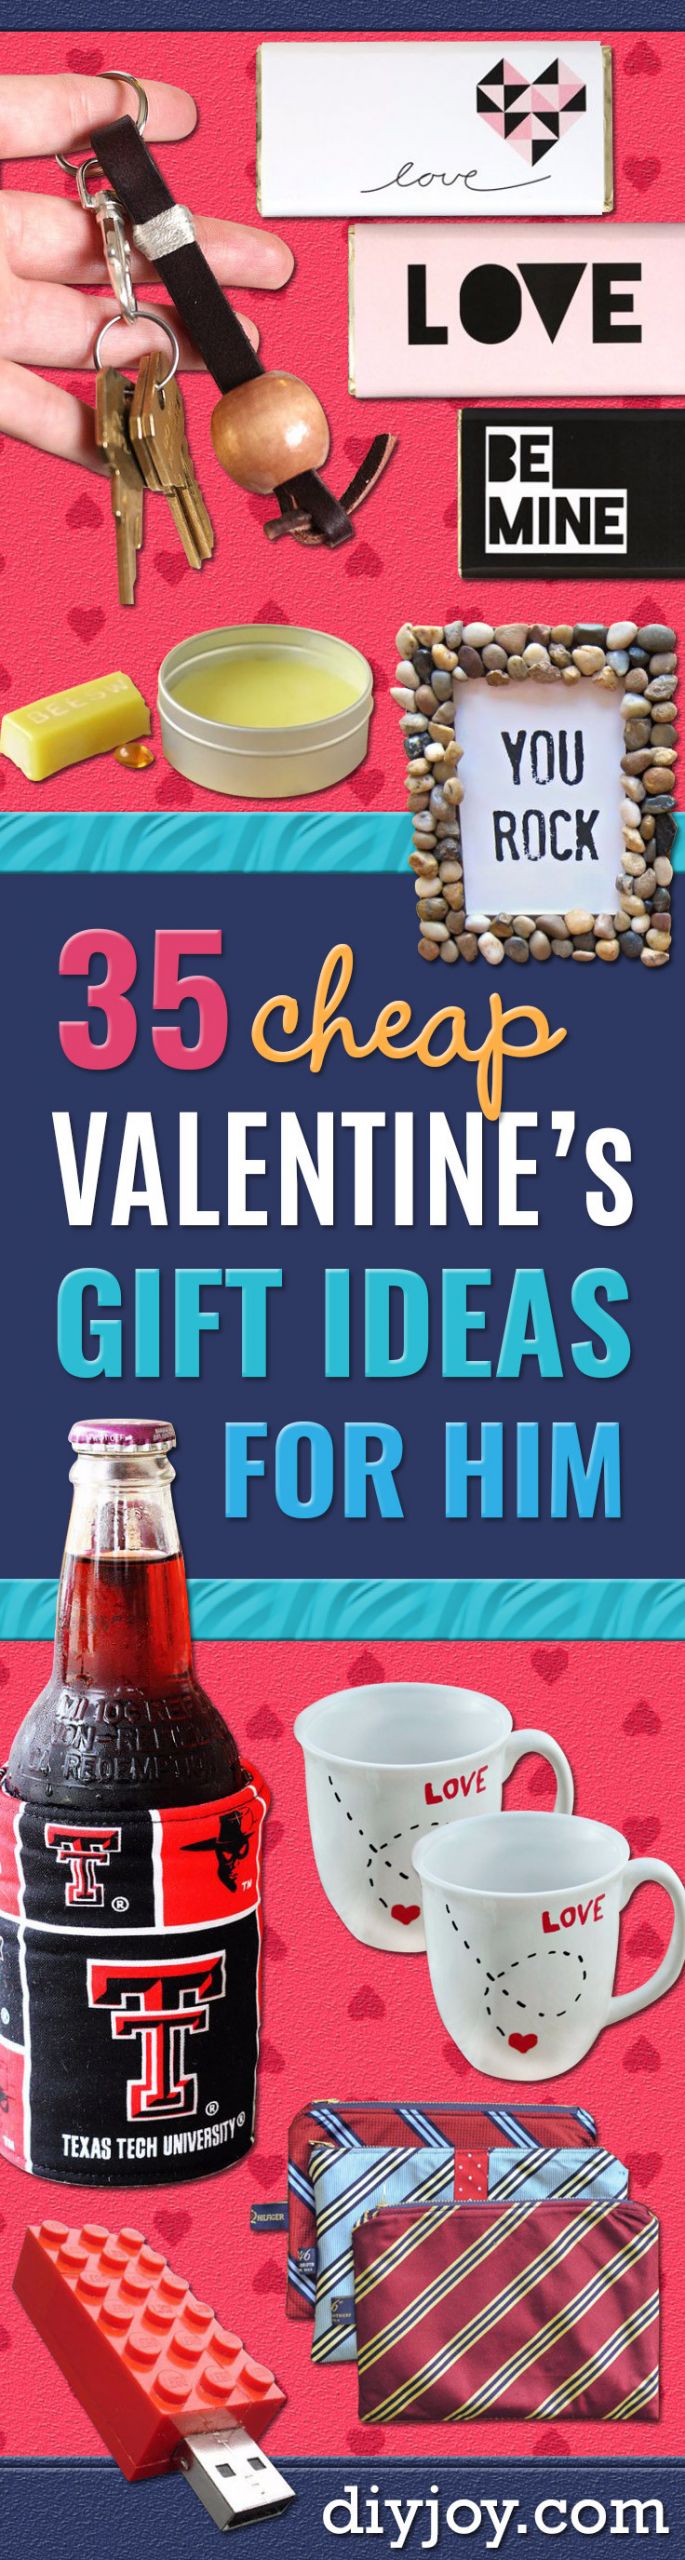 Gift Ideas For Him On Valentines
 35 Cheap Valentine s Gift Ideas for Him